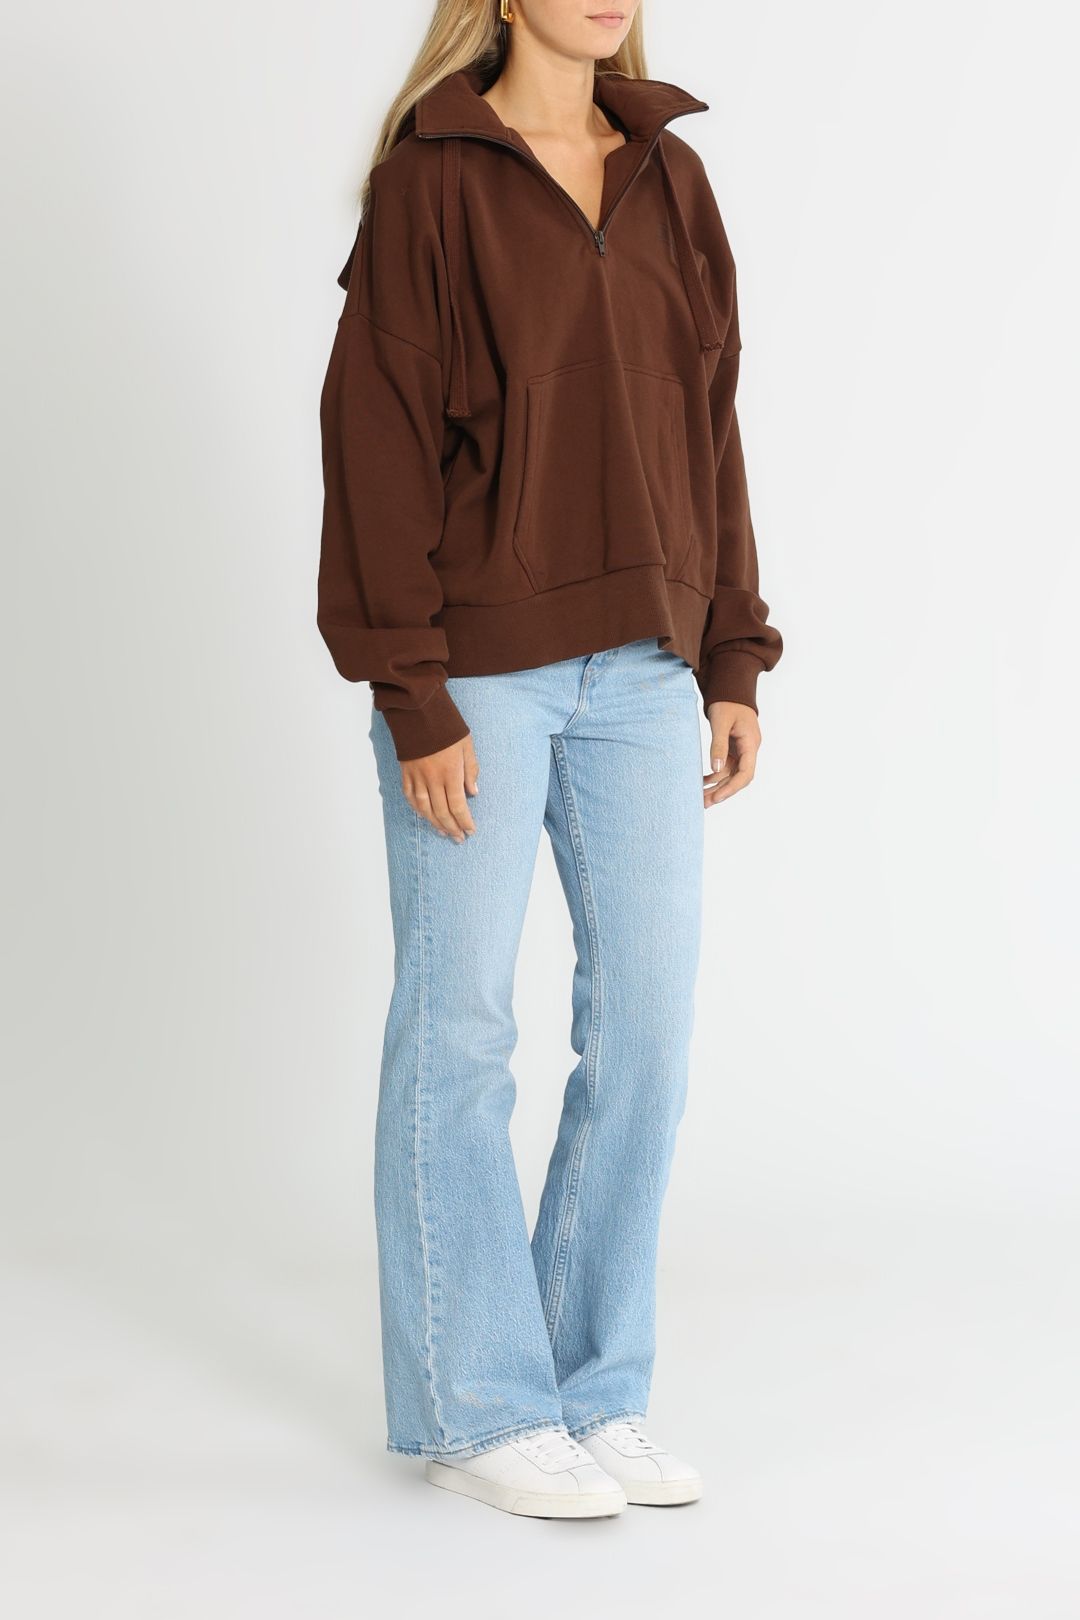 C&M Camilla and Marc Hayes Long Sleeve Hoodie Brown Ribbed Cuffs